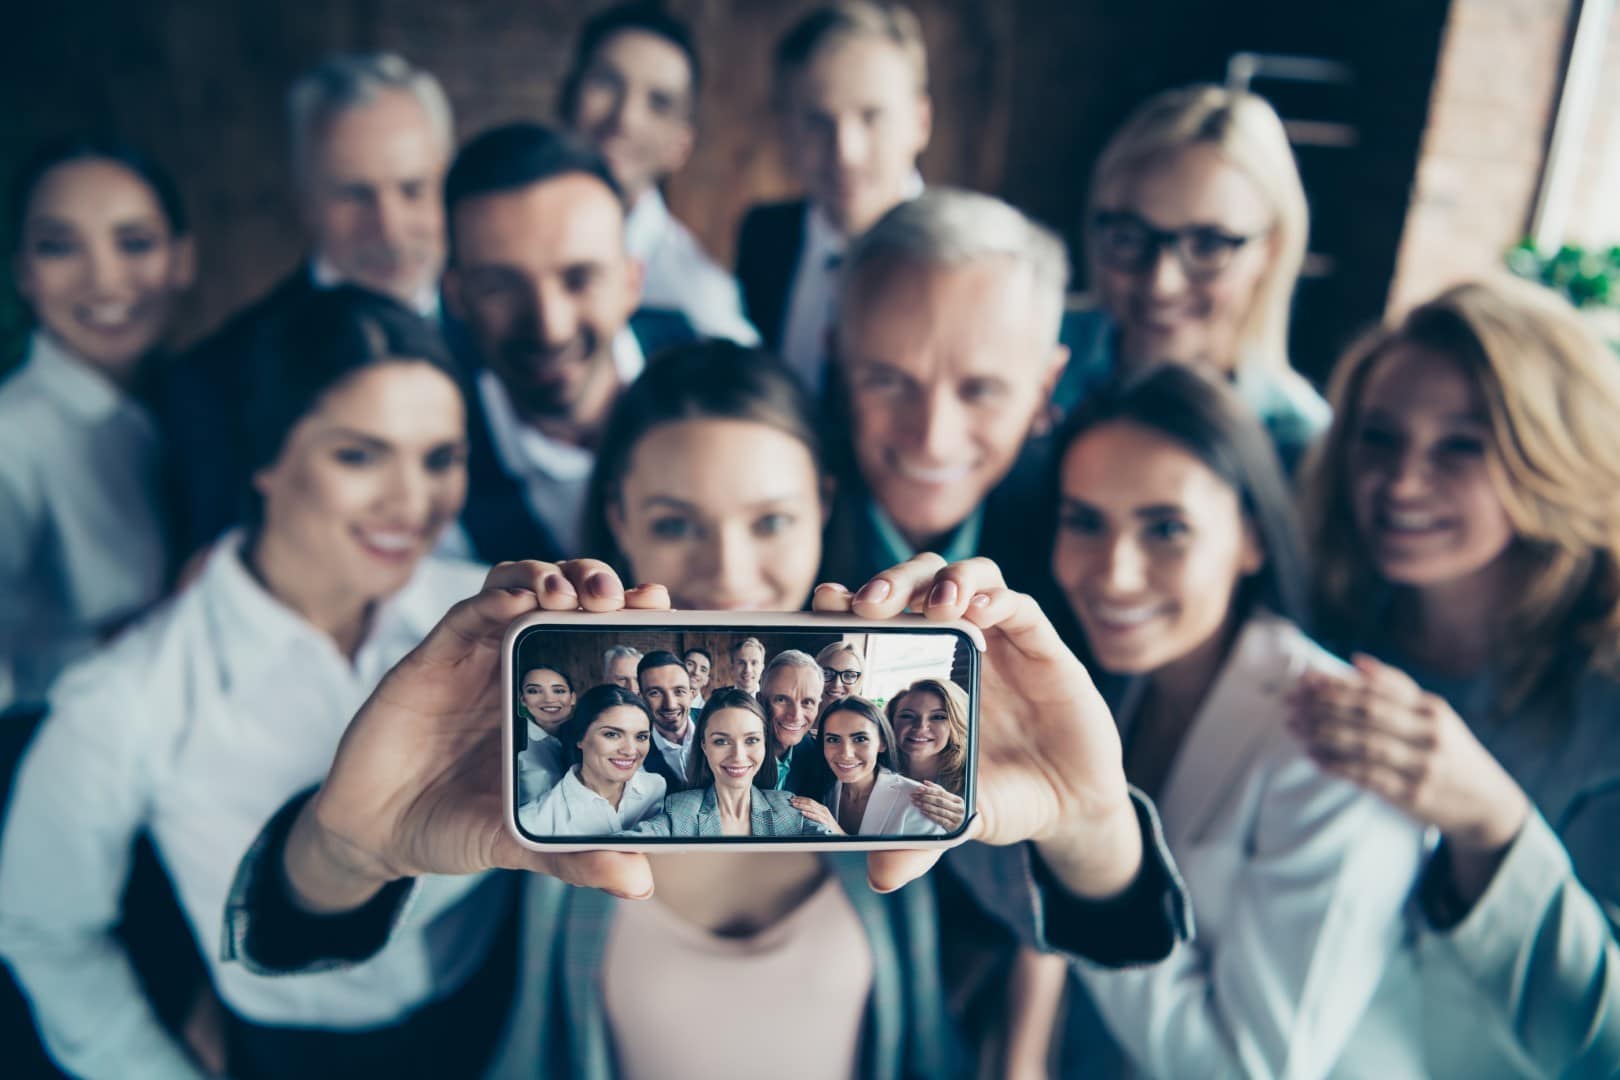 Close up blurry photo business people different age race free time excited team building hug embrace cuddle she her he him his telephone smart phone make take selfies formal wear jackets shirts.